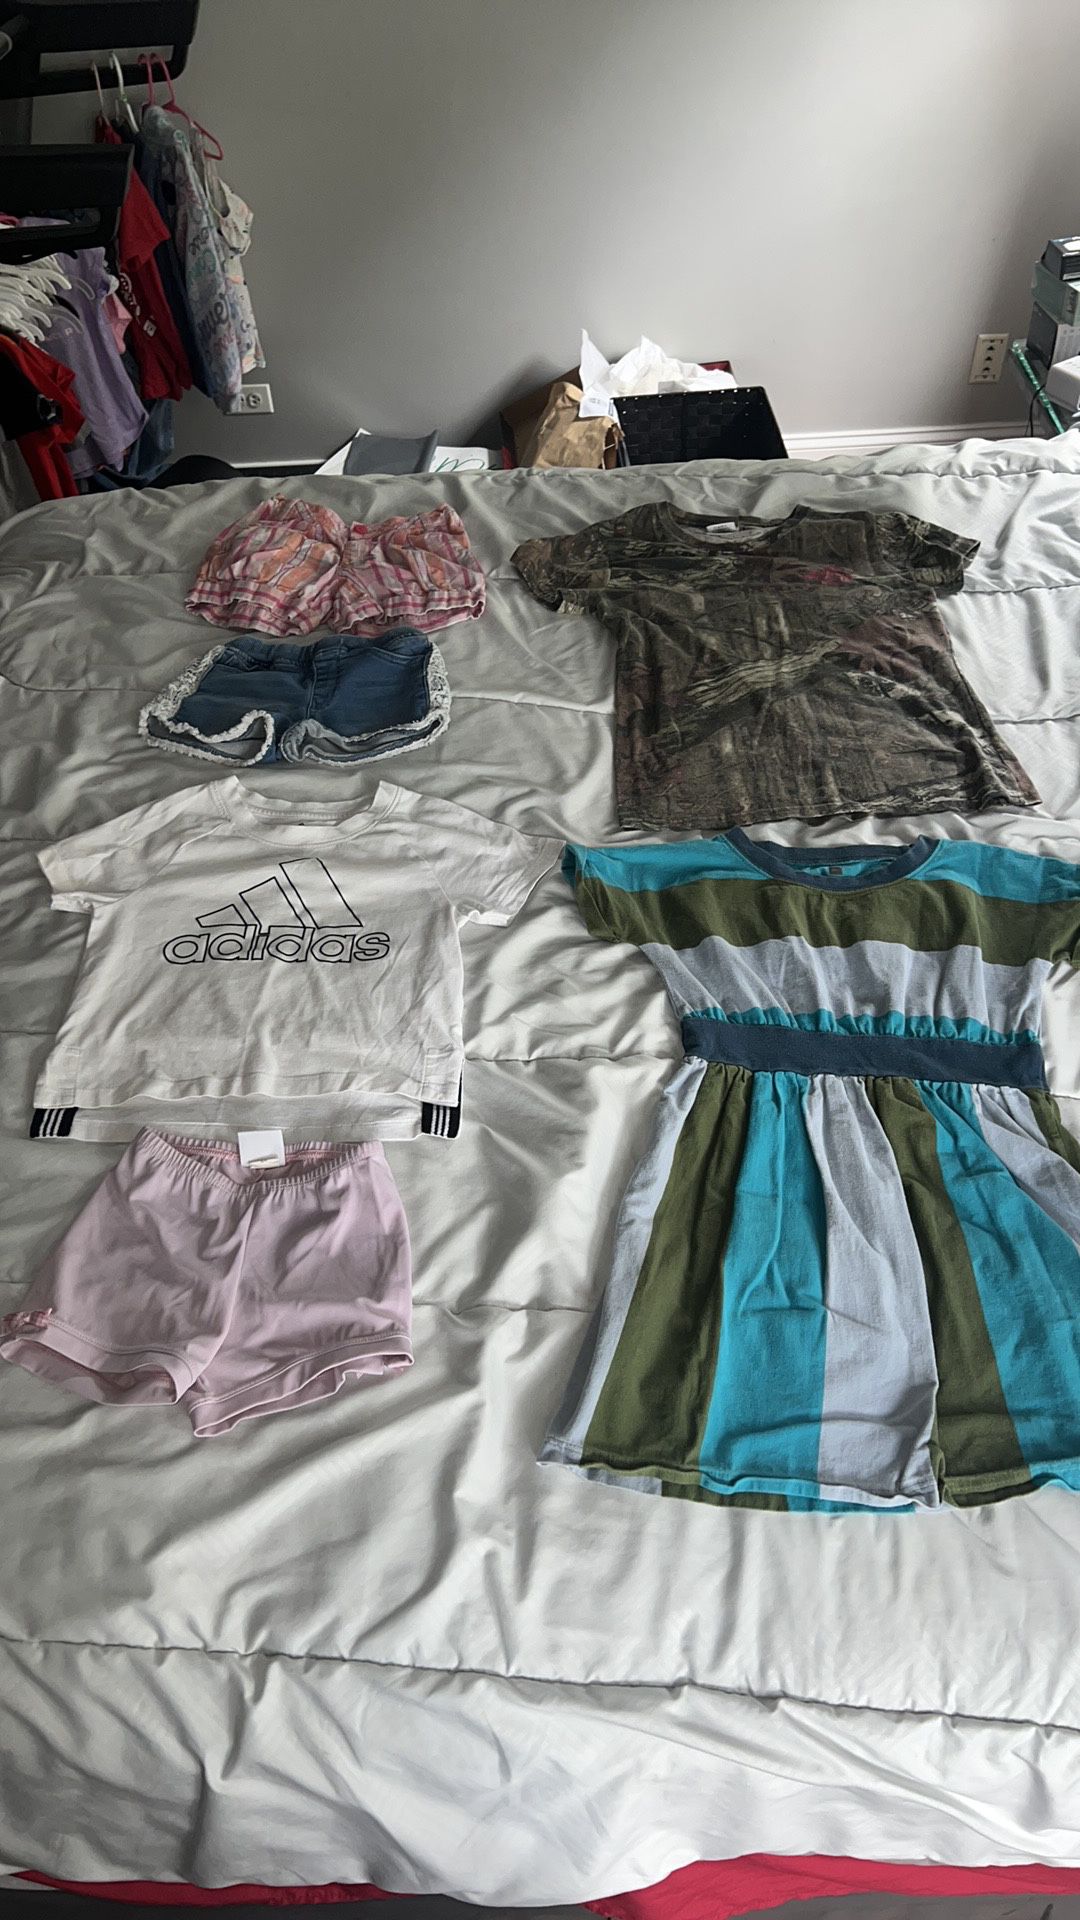 Girls 6/6x play clothes. Pink monkeybarbuddies shorts are size 5/6. Adidas shirt has stains. Joes jean shirt lace is frayed. Plaid shorts are lands en